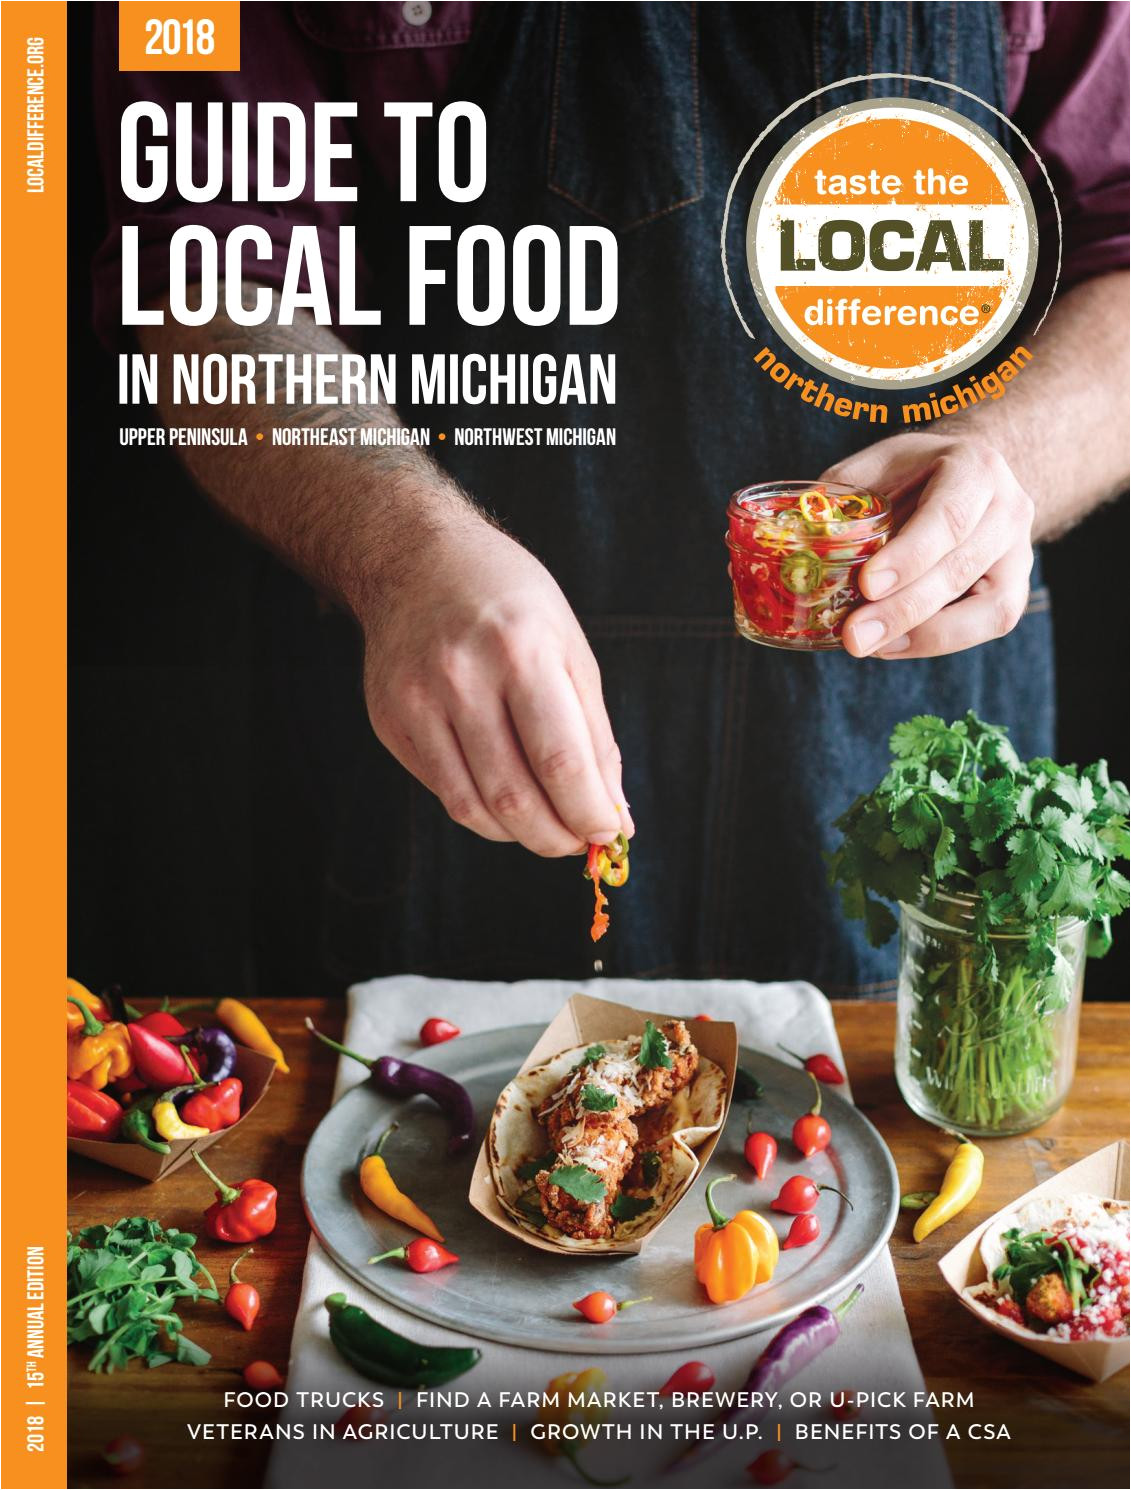 2018 guide to local food for northern michigan by taste the local difference issuu